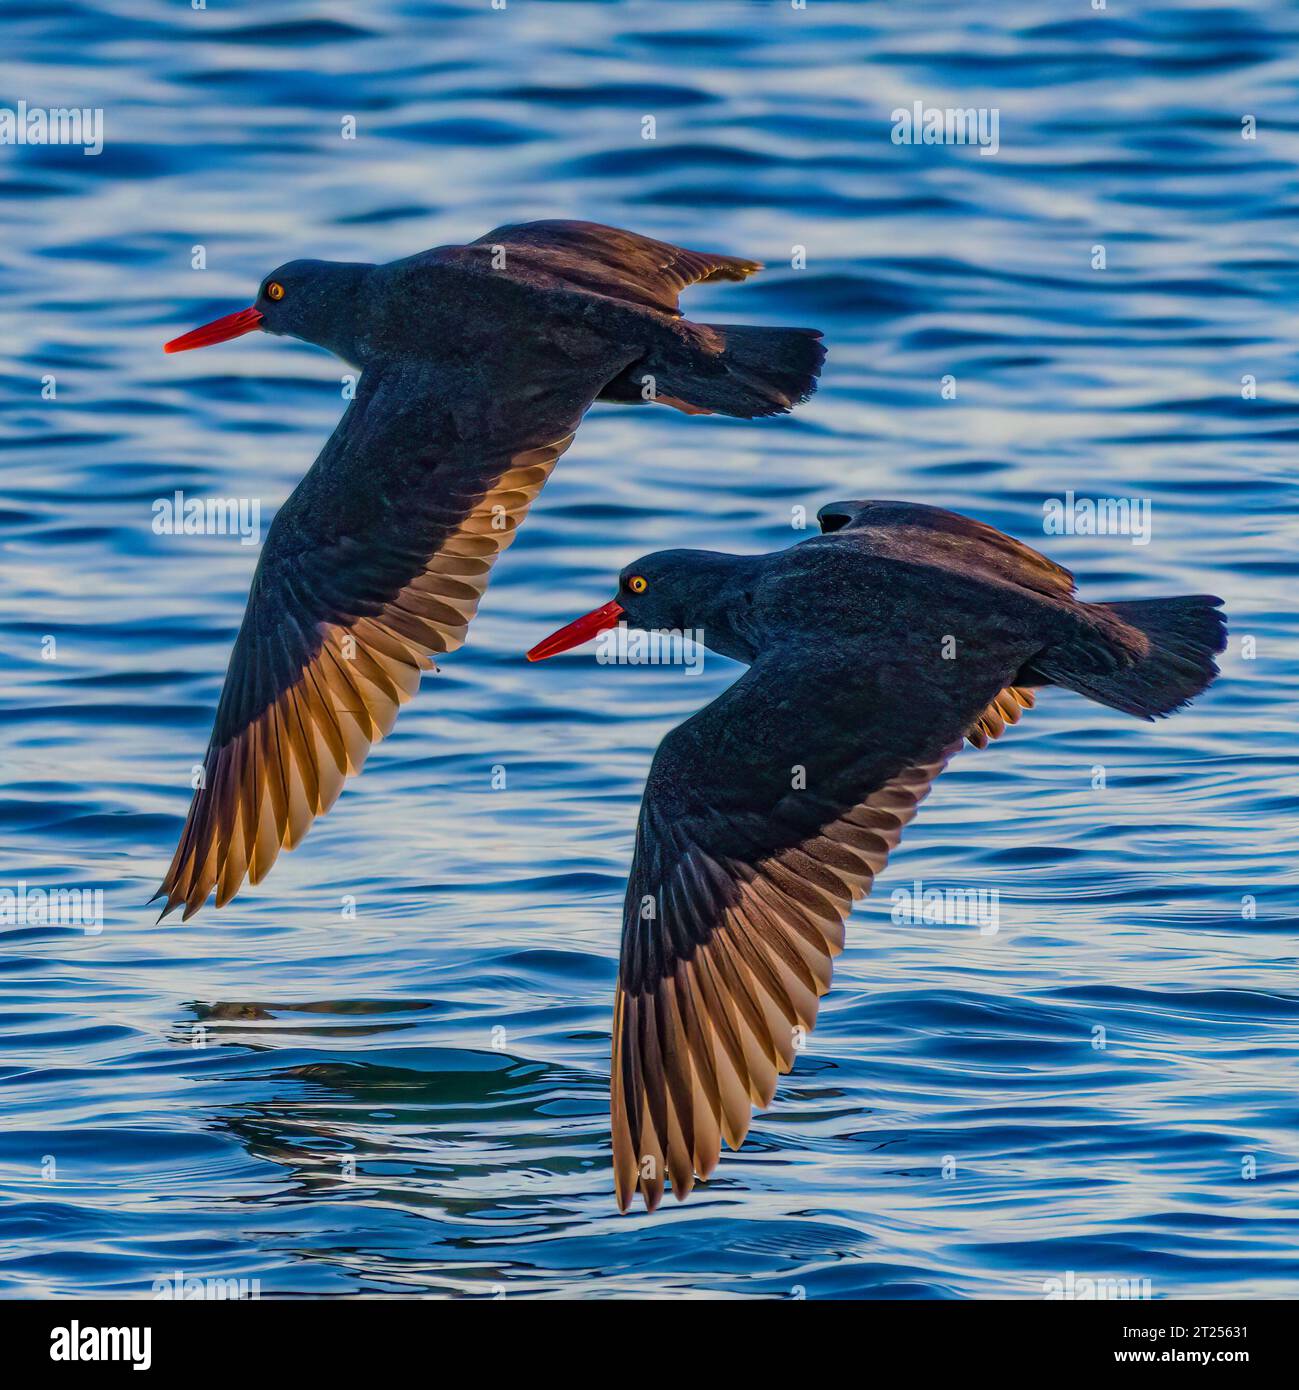 Two Black Oyster Catchers in Flight, British Columbia, Canada Stock Photo